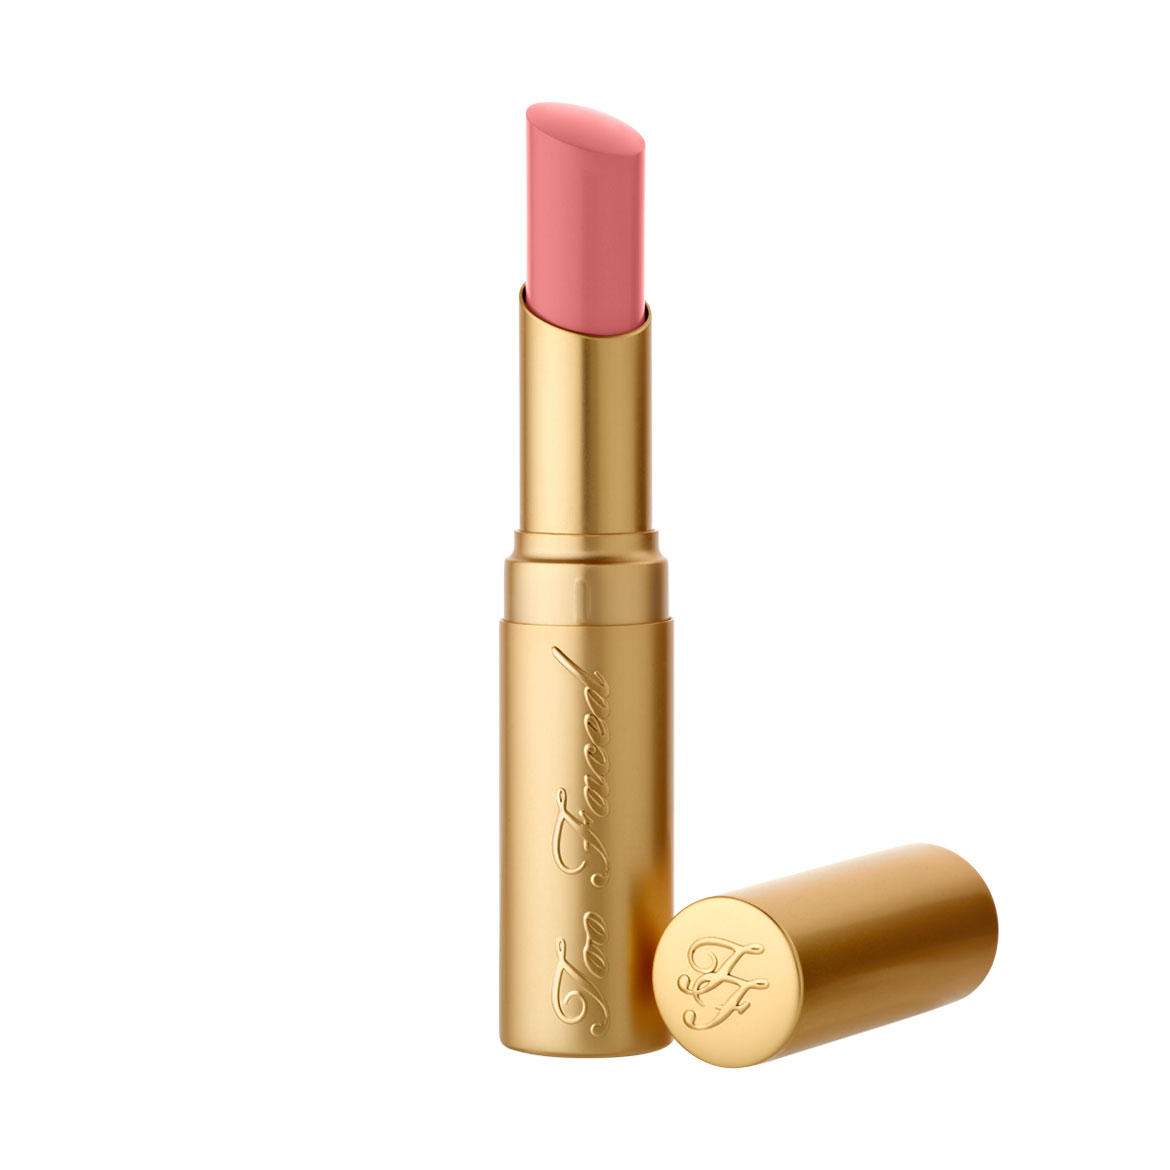 Repeat- Too Faced La Creme Lipstick Shimmering Marshmallow Bunny